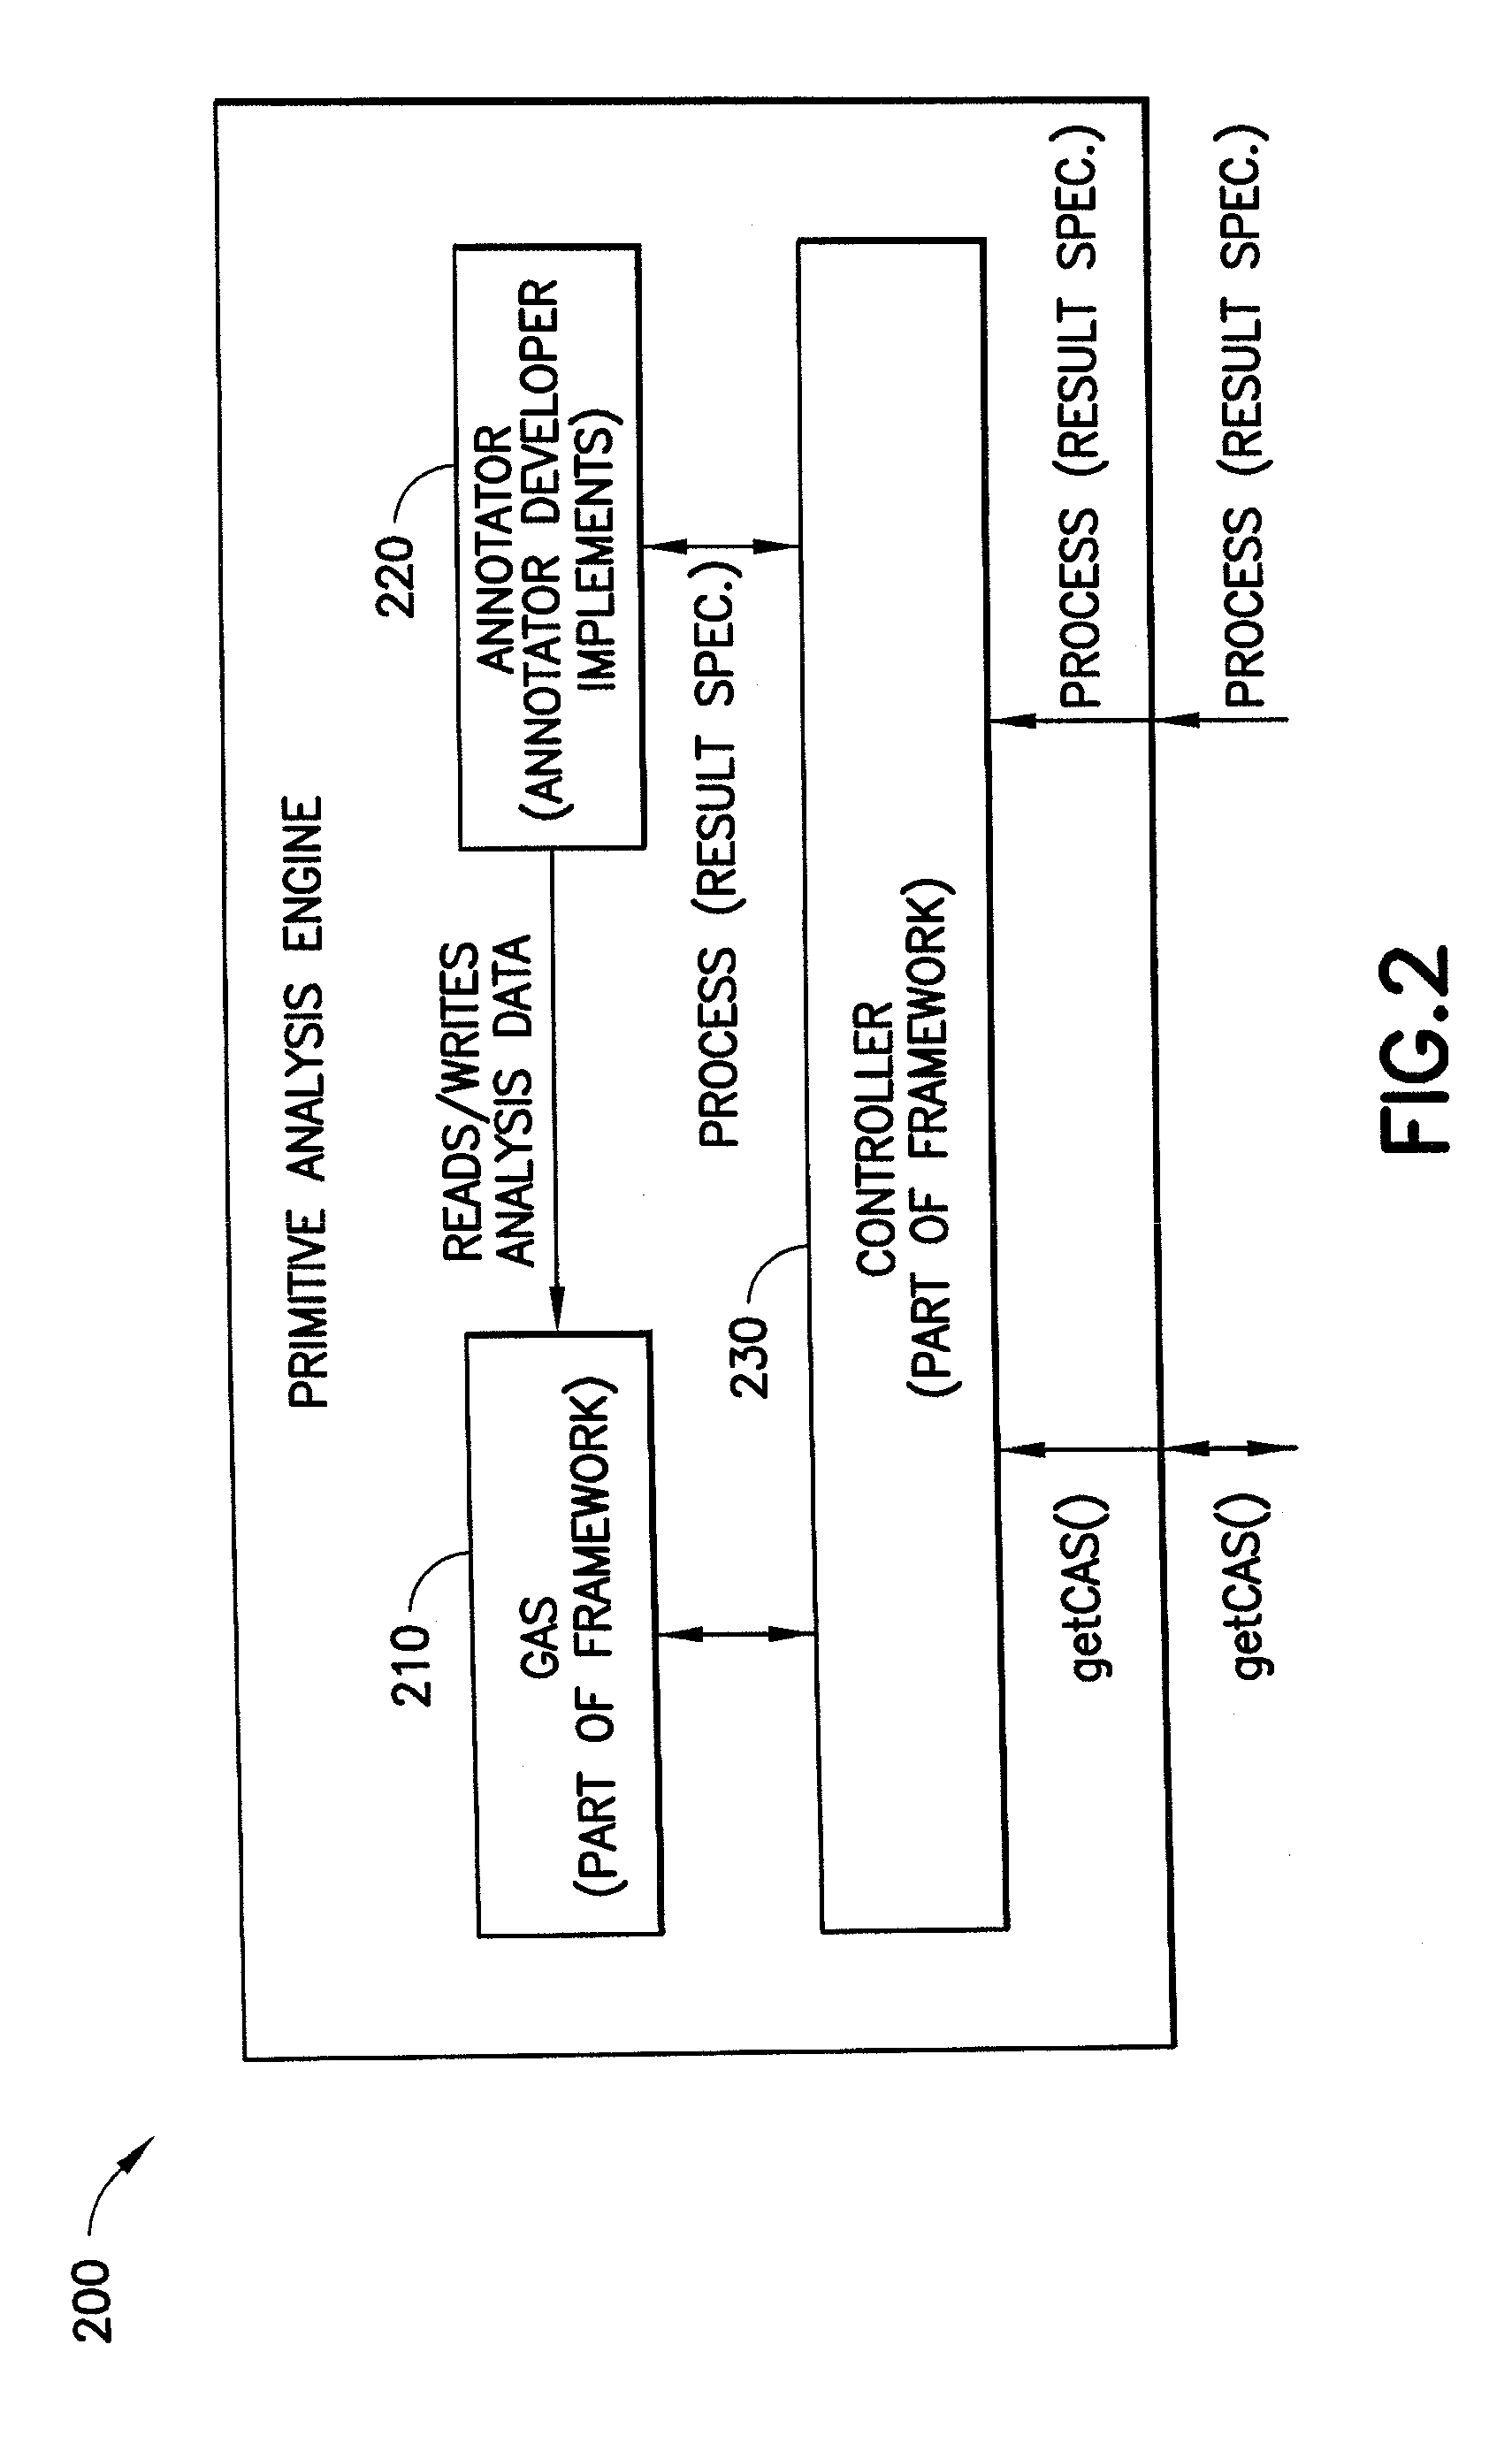 System, Method and Computer Program Product for Performing Unstructured Information Management and Automatic Text Analysis, Including a Search Operator Functioning as a Weighted And (WAND)